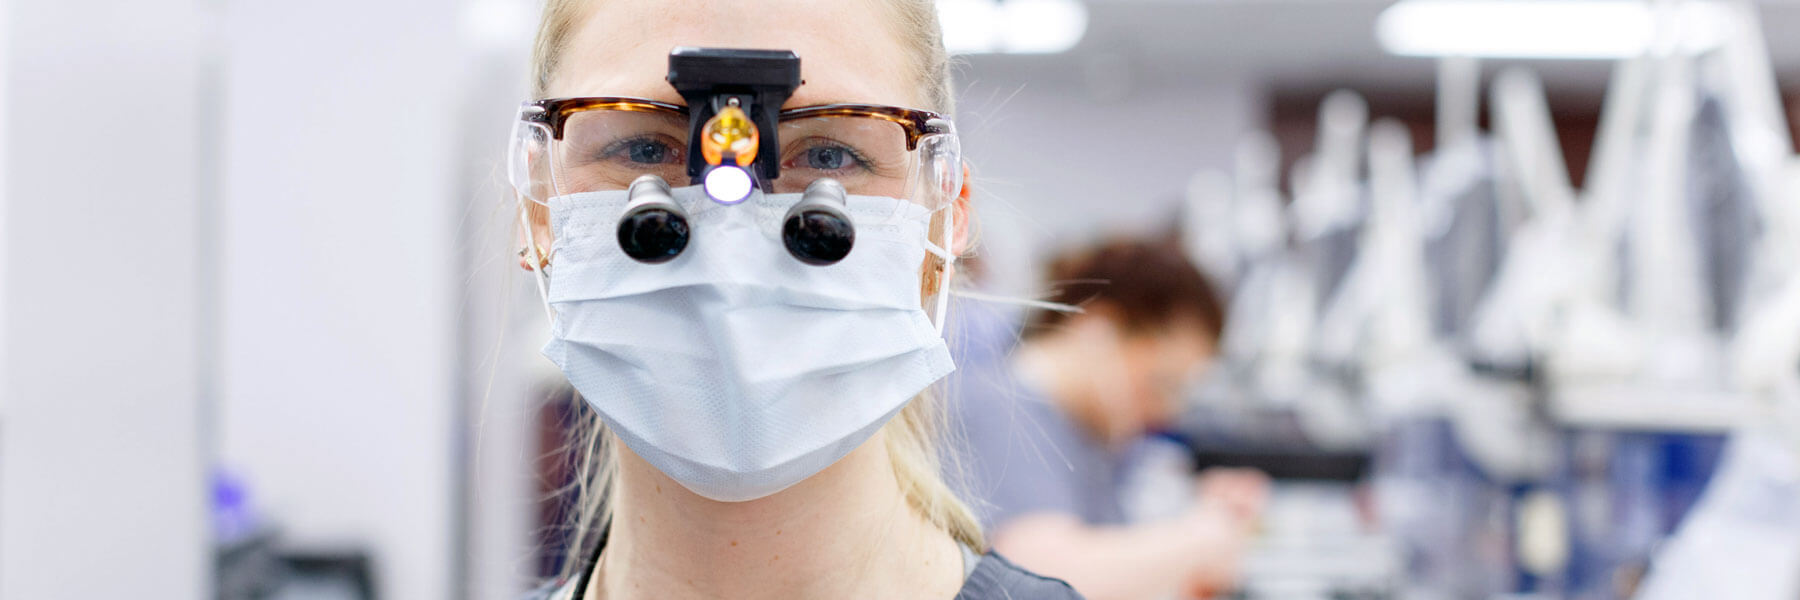 A student wears her scrubs, mask, and protective glasses with headlight.